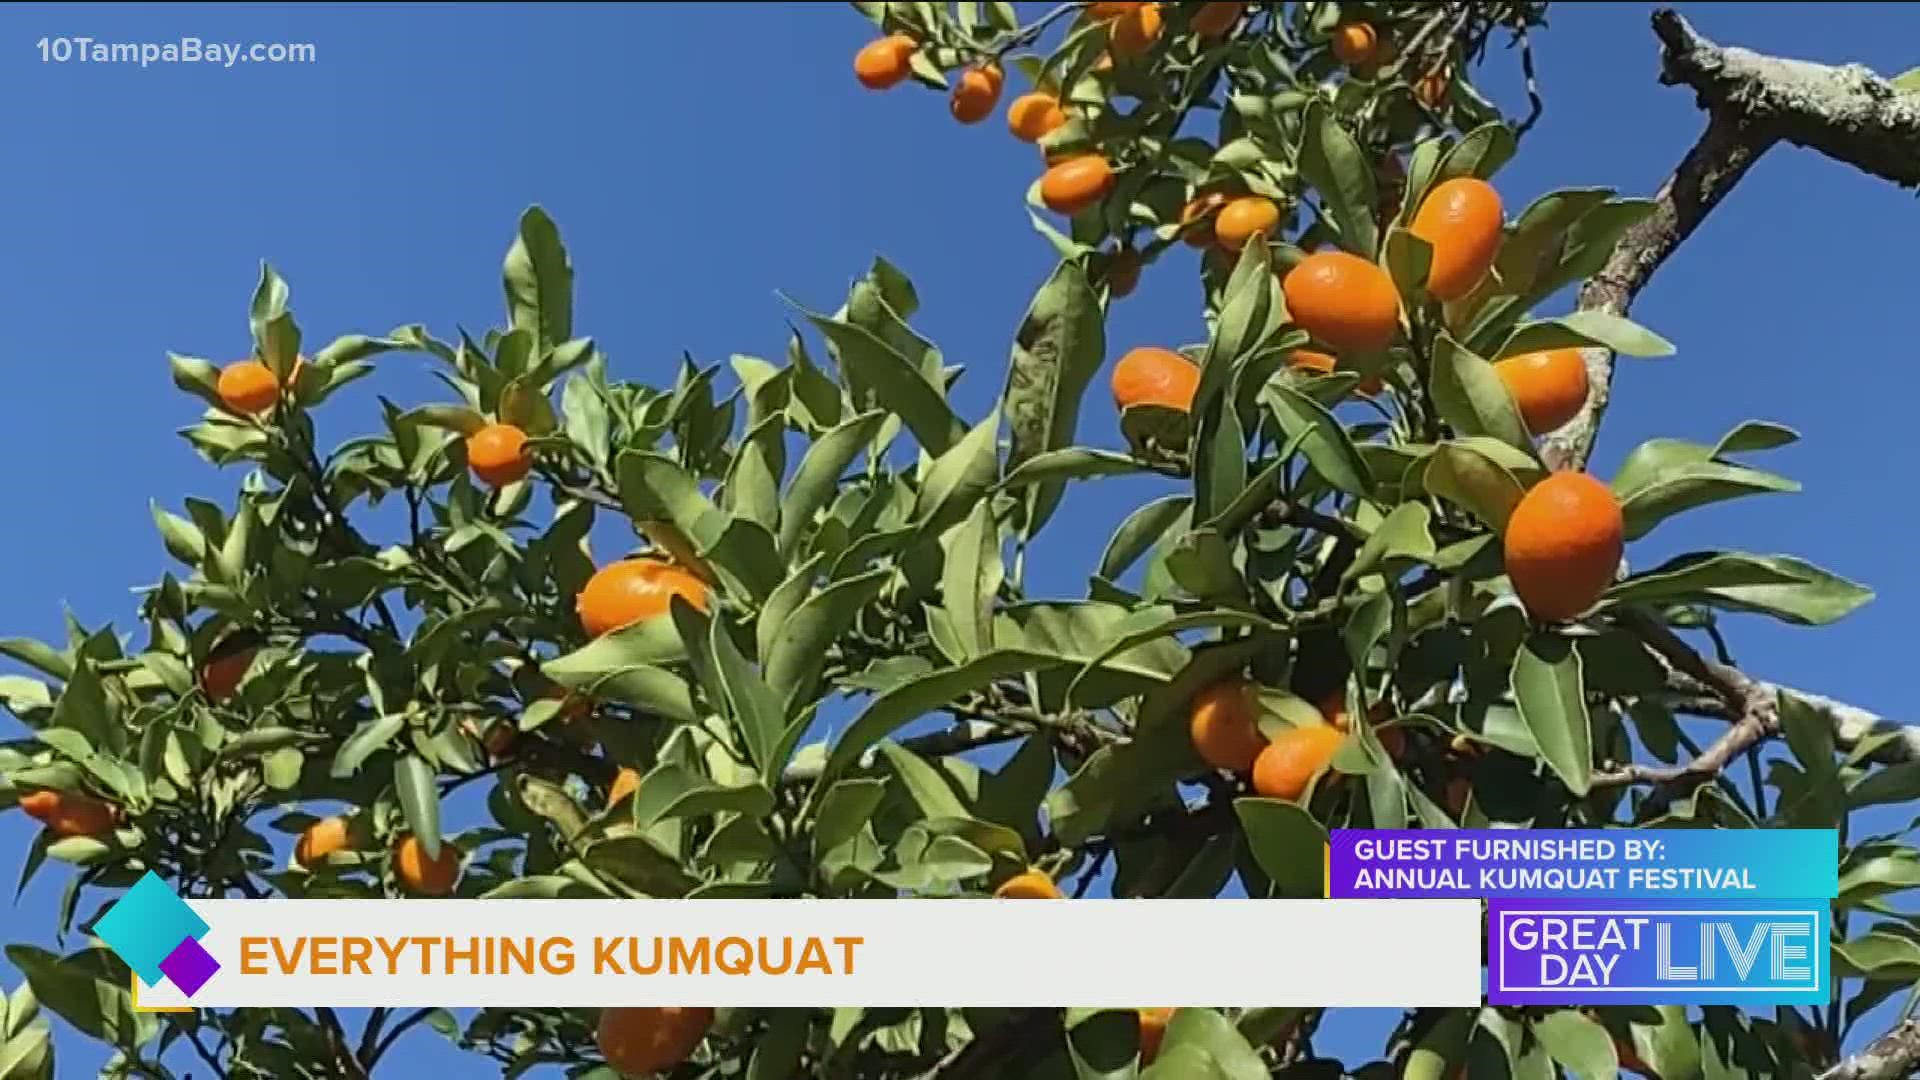 The 25th Annual Kumquat Festival is coming to Dade City